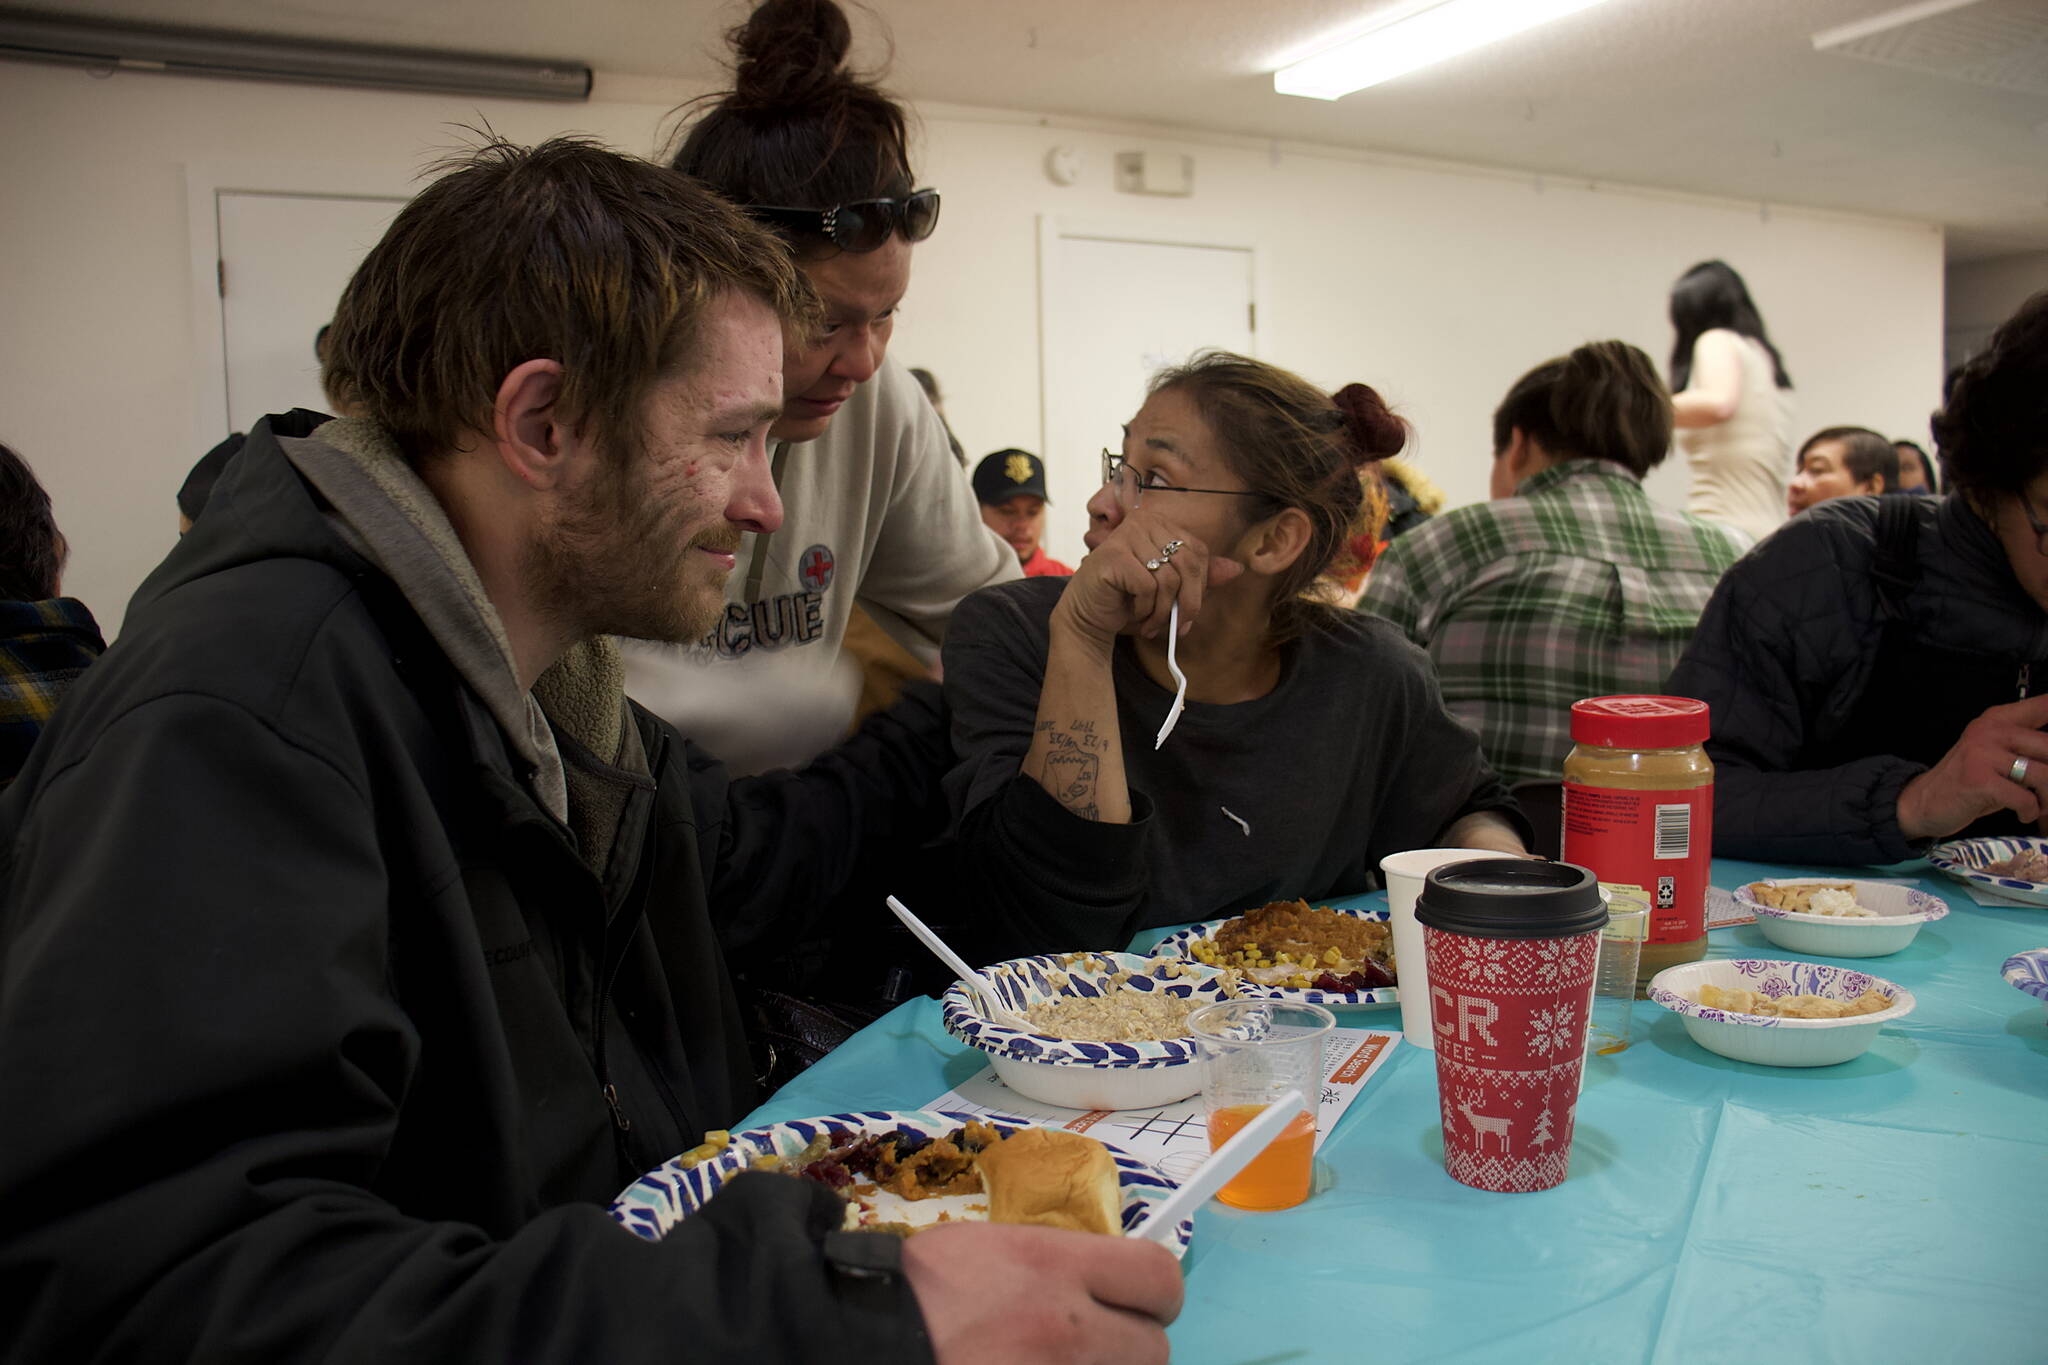 Mark Sabbatini / Juneau Empire
Christopher Whitehead and Ida Sheakley, at table, are visited by friend Shelly Stevens during a communal Thanksgiving meal at the Juneau Yacht Club hosted by The Salvation Army Juneau Corps on Thursday.